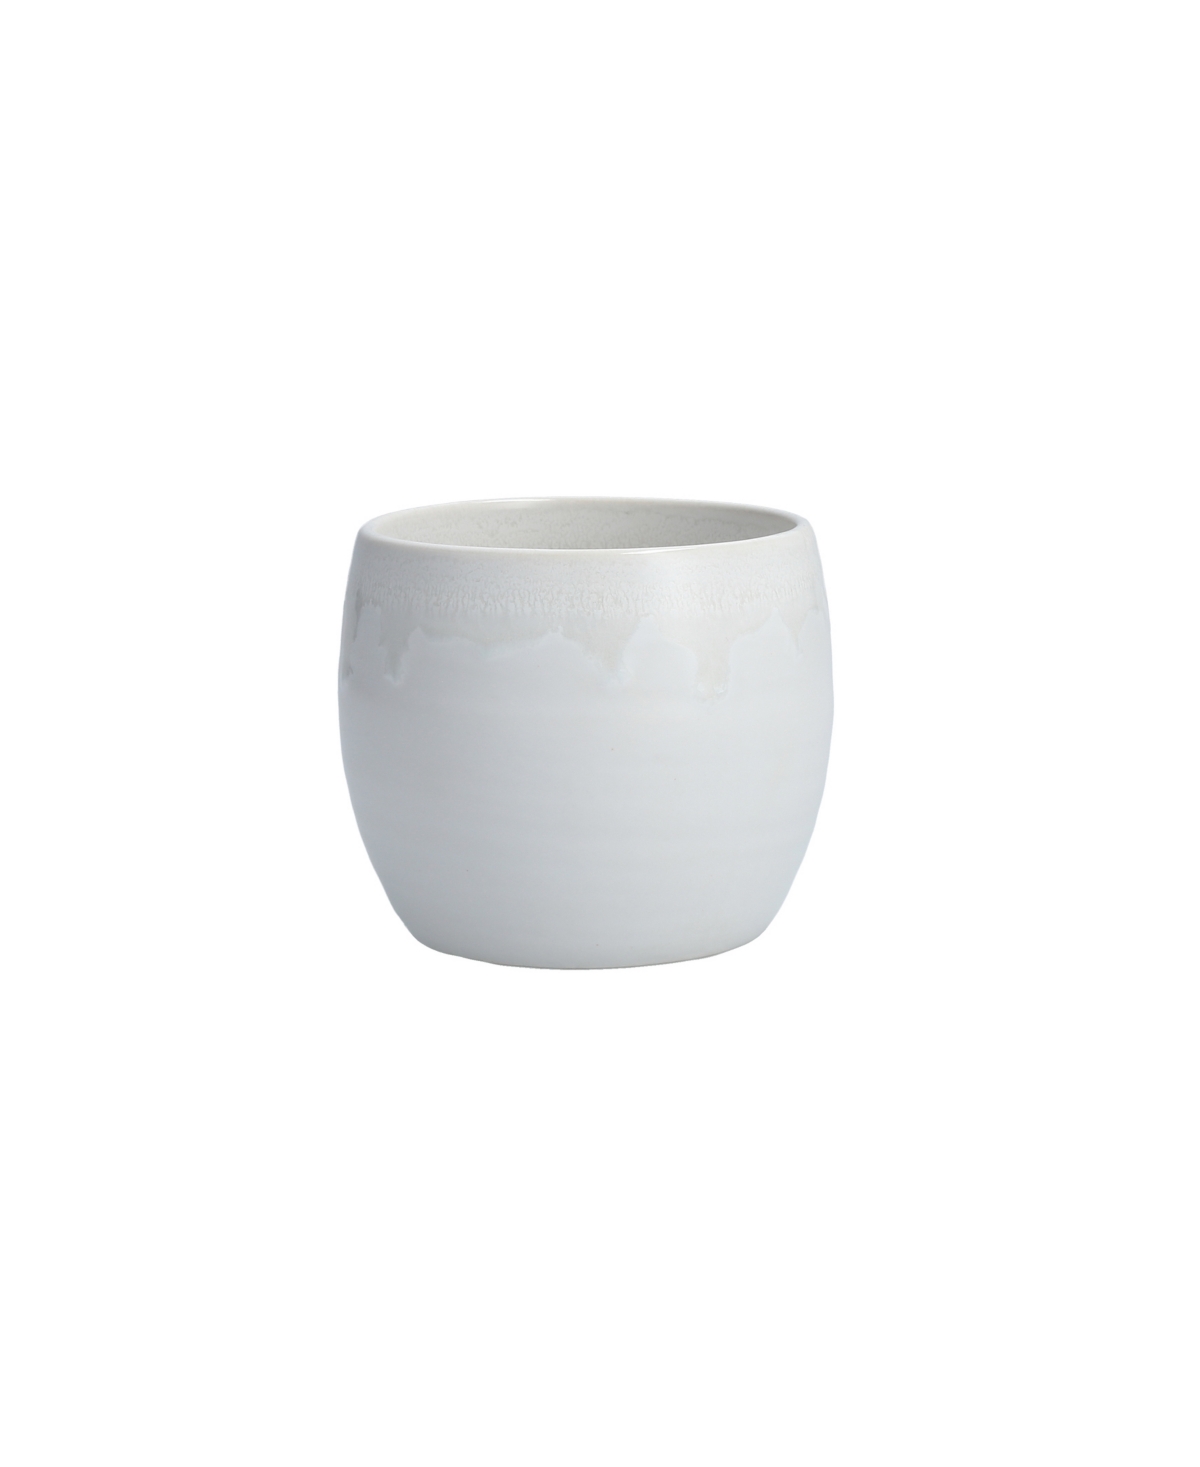 Cloud Terre Harlan Cups, Set of 4 - White